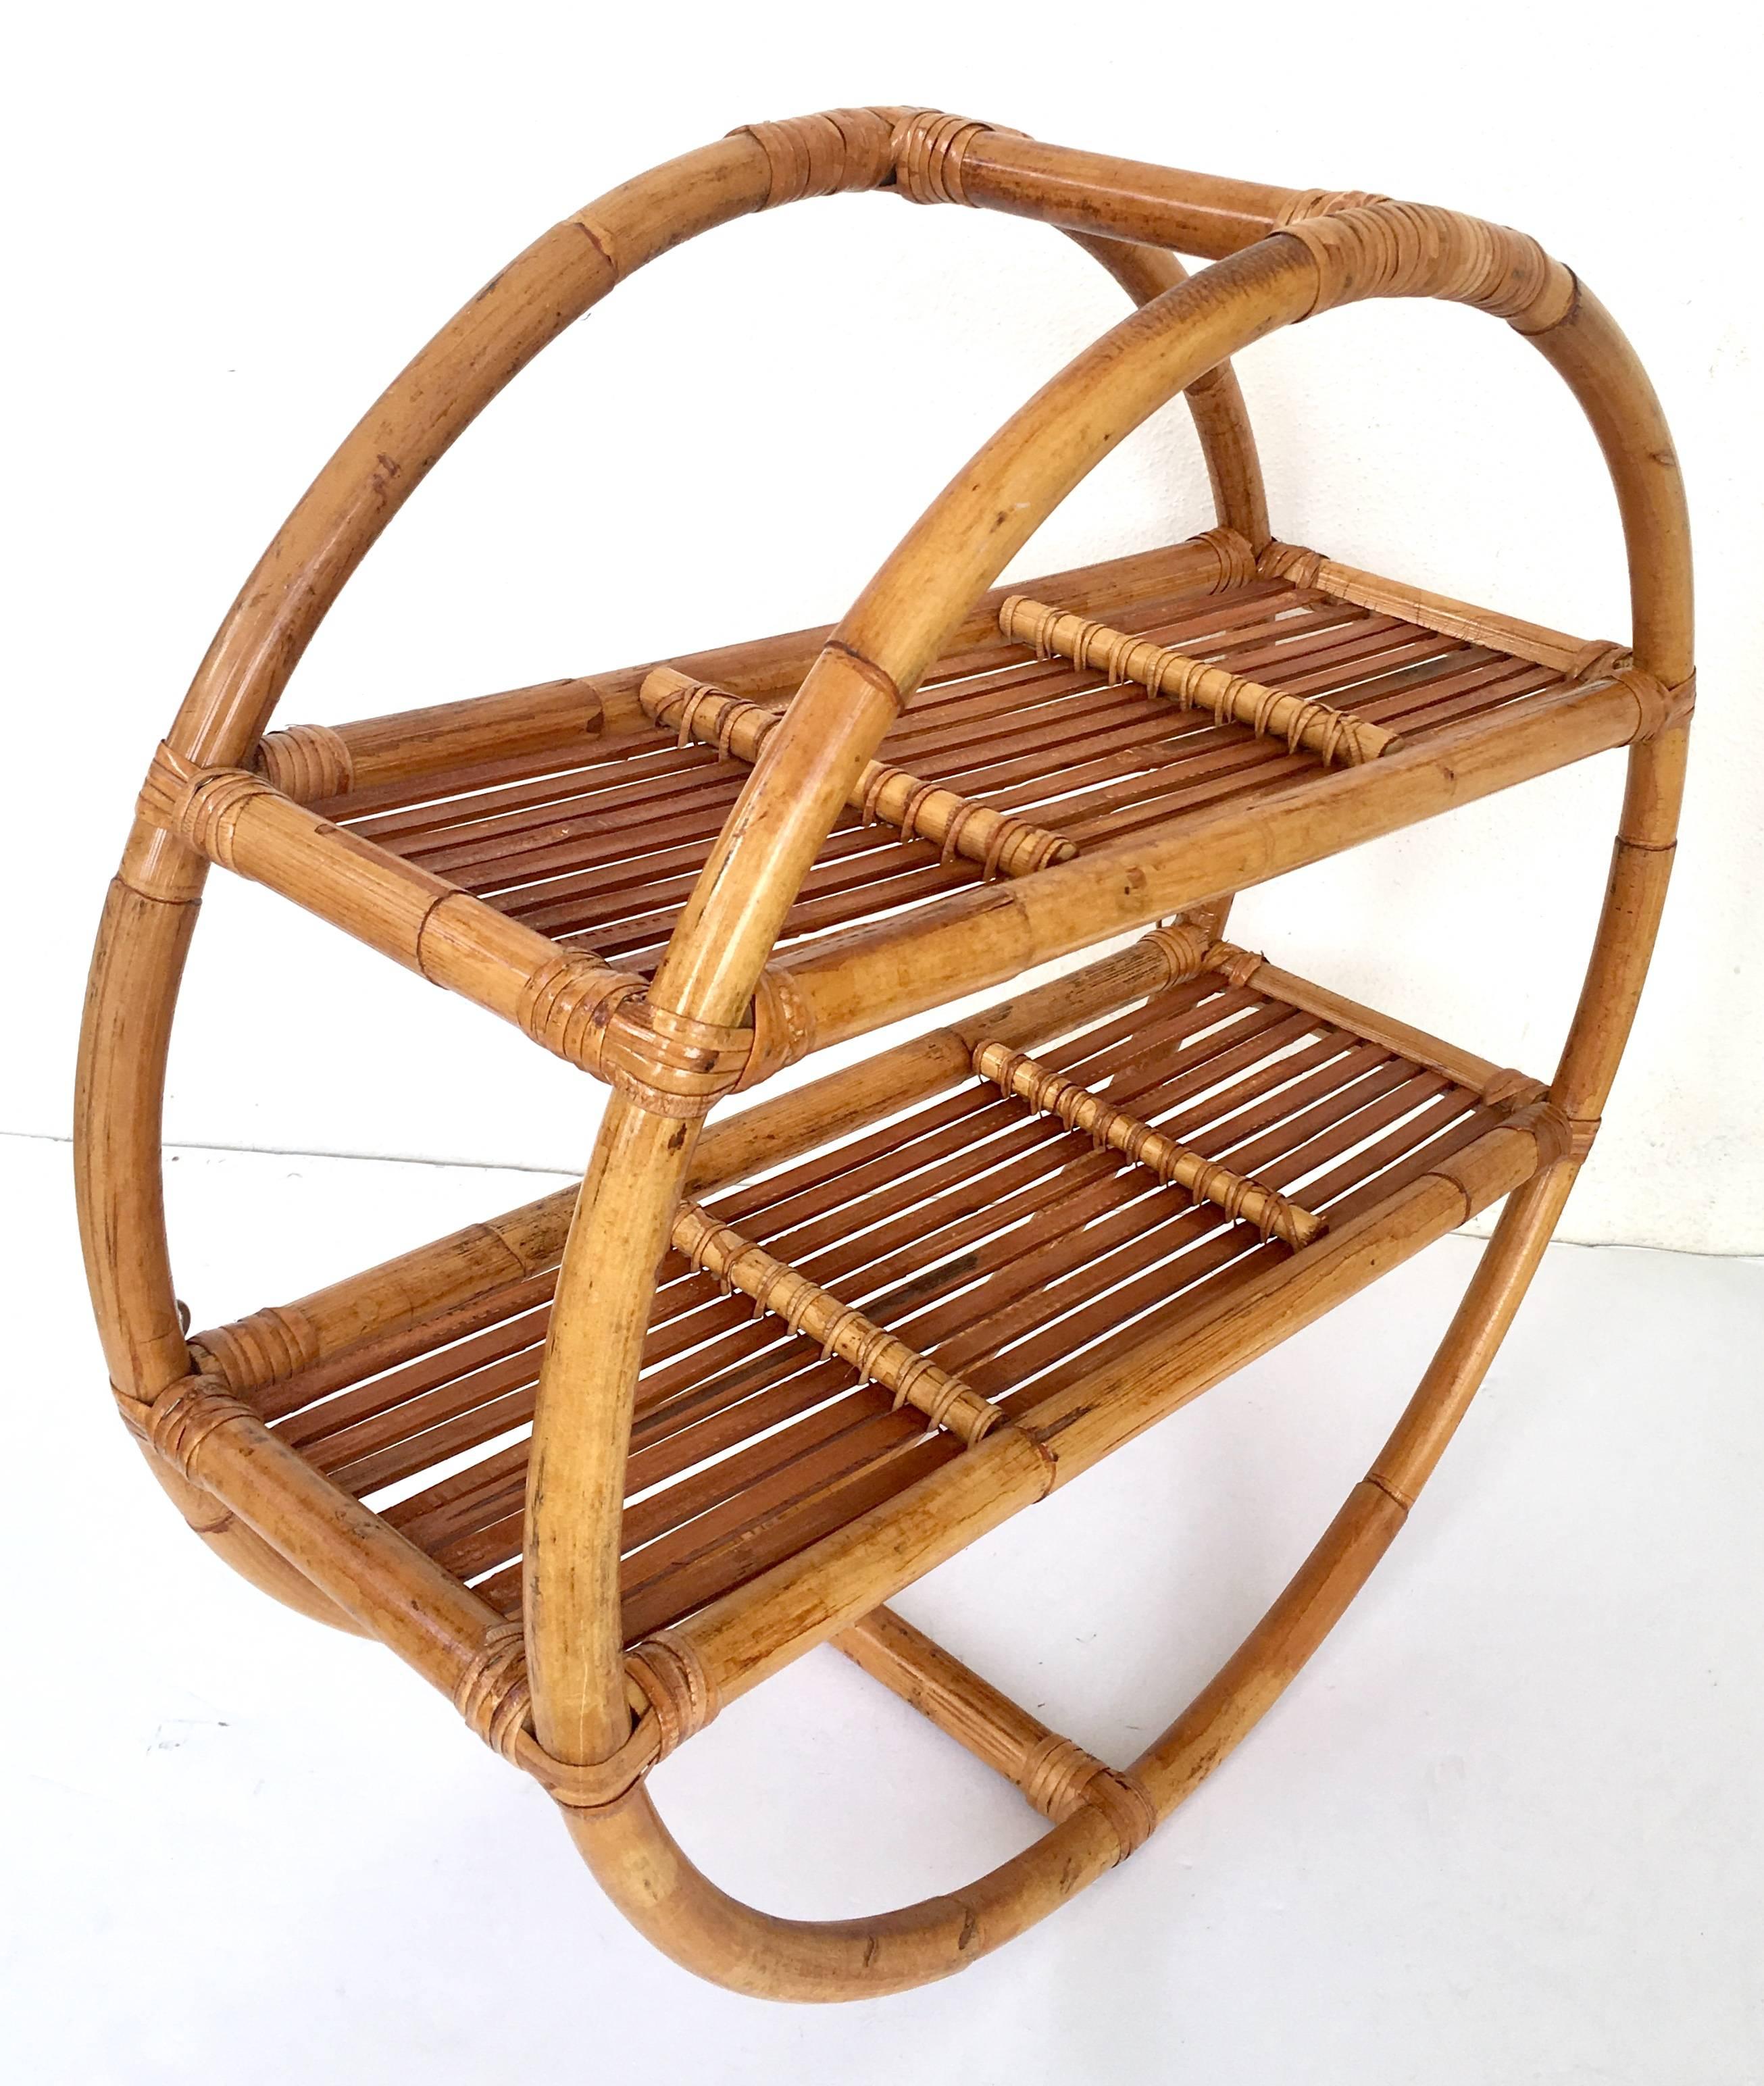 Art Deco bent rattan and wicker round wall-mounted shelf display. This rare and coveted two shelf, round wall-mounted shelf is fabricated of bent rattan and features two existing steel mounted hooks and is ready to hang. Each shelf is approximately,